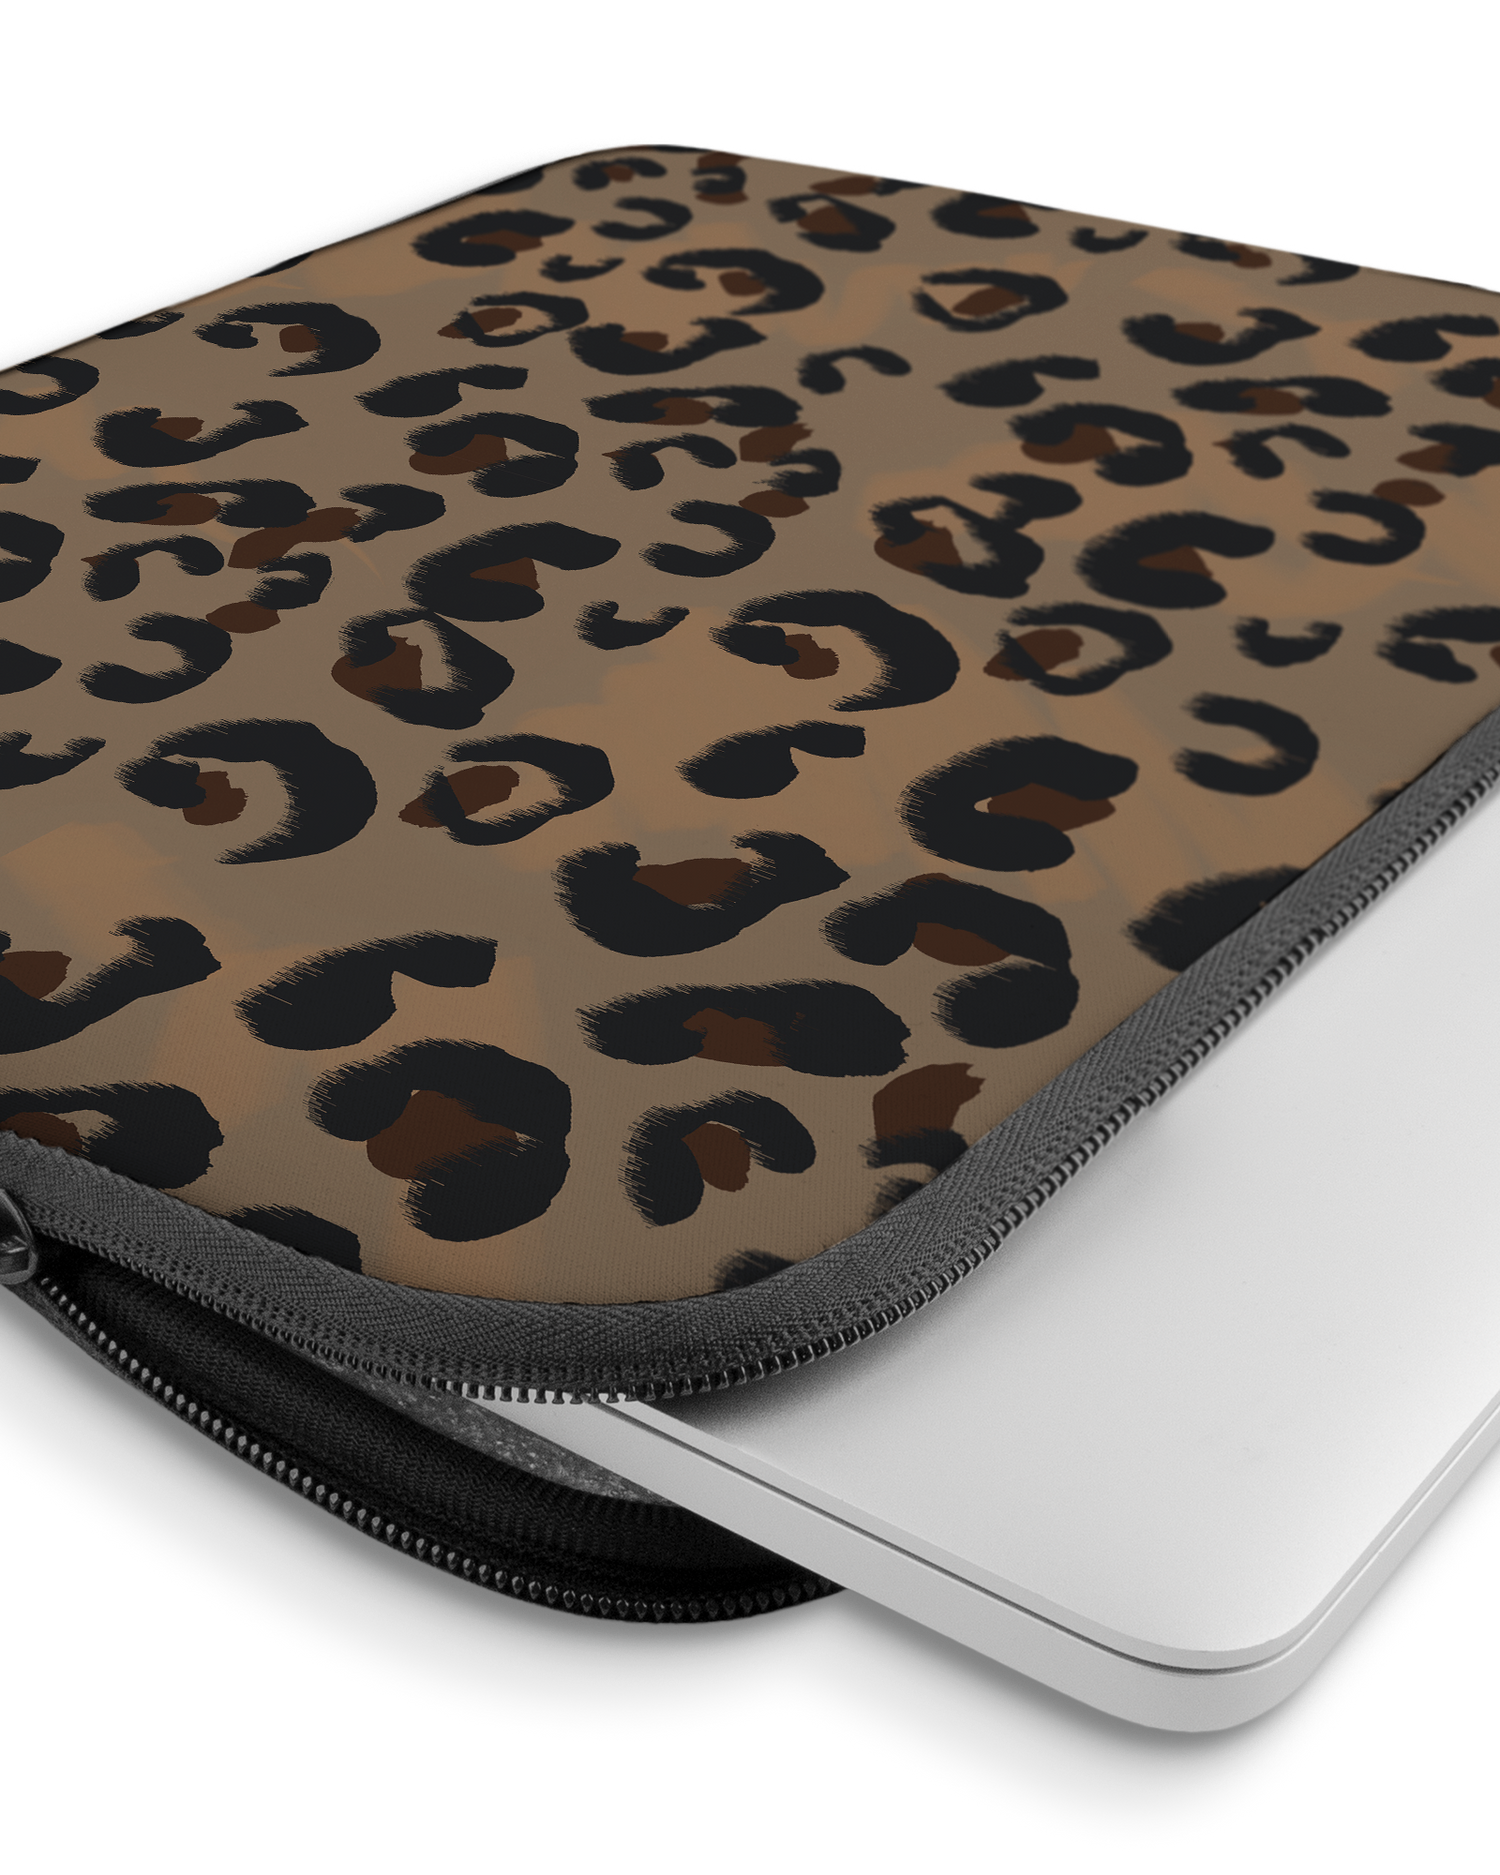 Leopard Repeat Laptop Case 15 inch with device inside